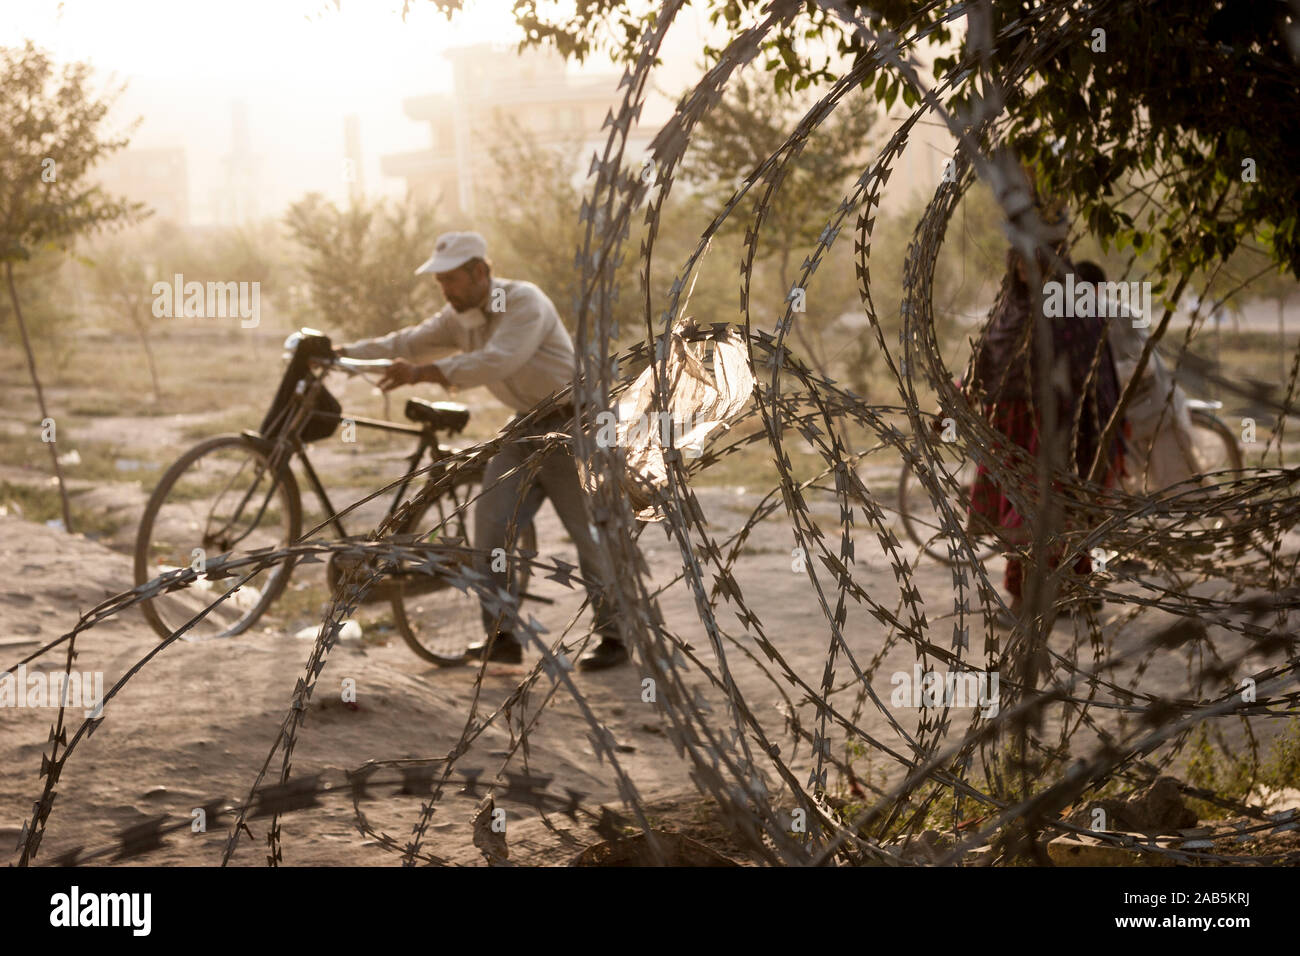 A man pushes his bicycle on the other side of coils of barbed wire laid along a frquently used path in Kabul, Afghanistan Stock Photo